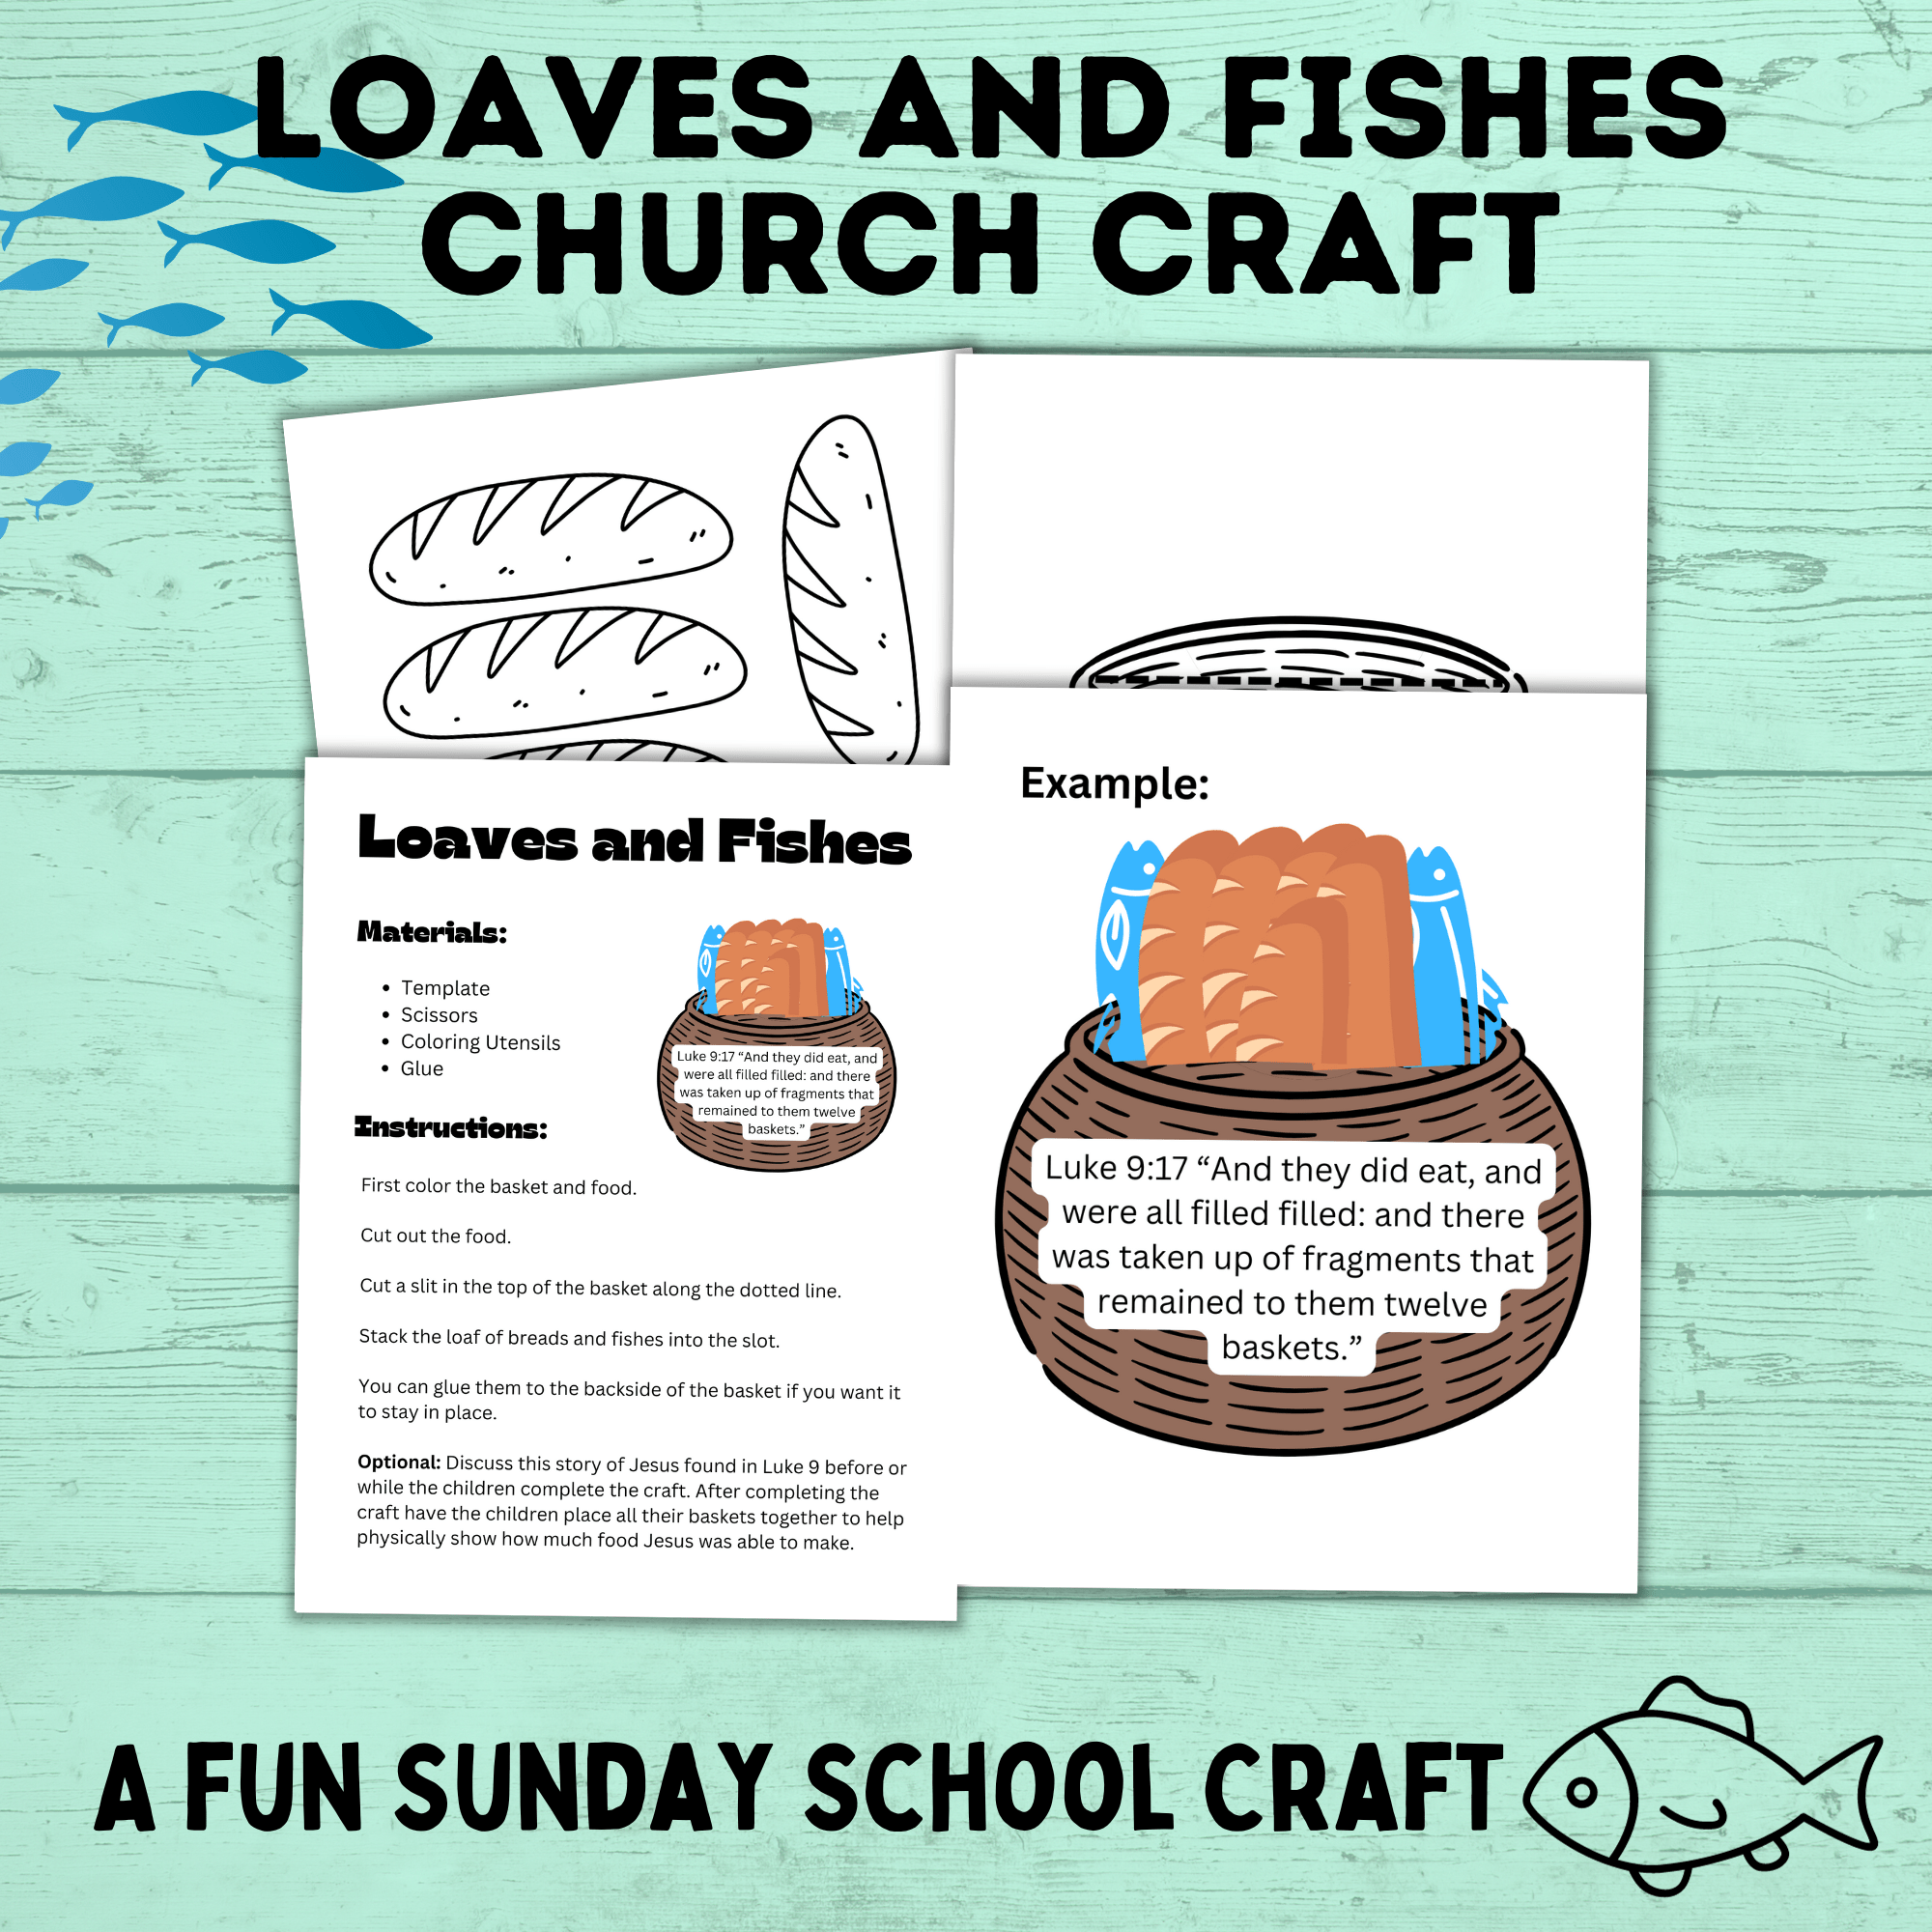 Loaves and Fishes Craft for Sunday School | Jesus Craft | Primary Craf ...